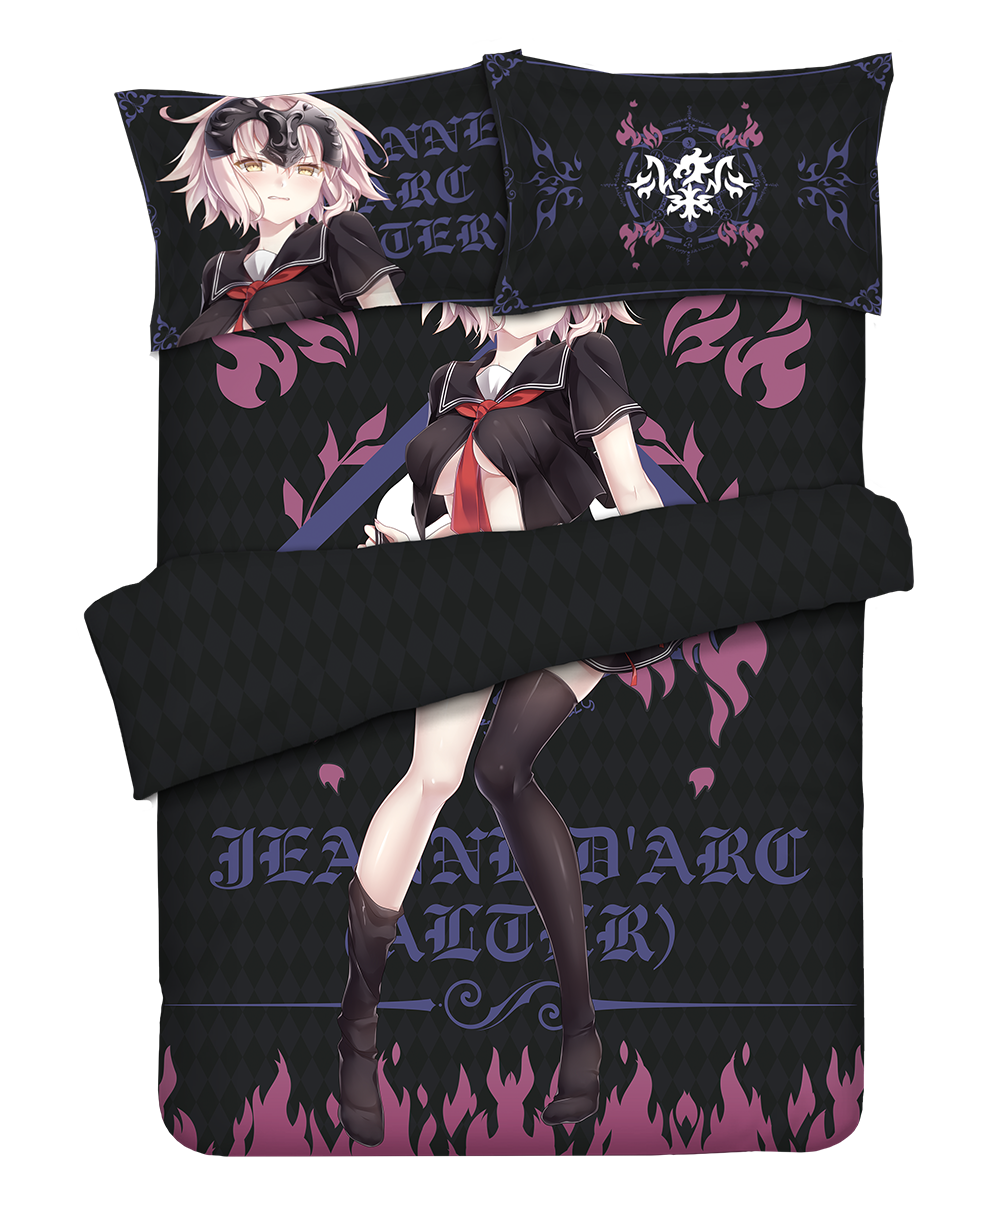 Jeanne d'Arc-Fate Grand order Anime 4 Pieces Bedding Sets,Bed Sheet Duvet Cover with Pillow Covers